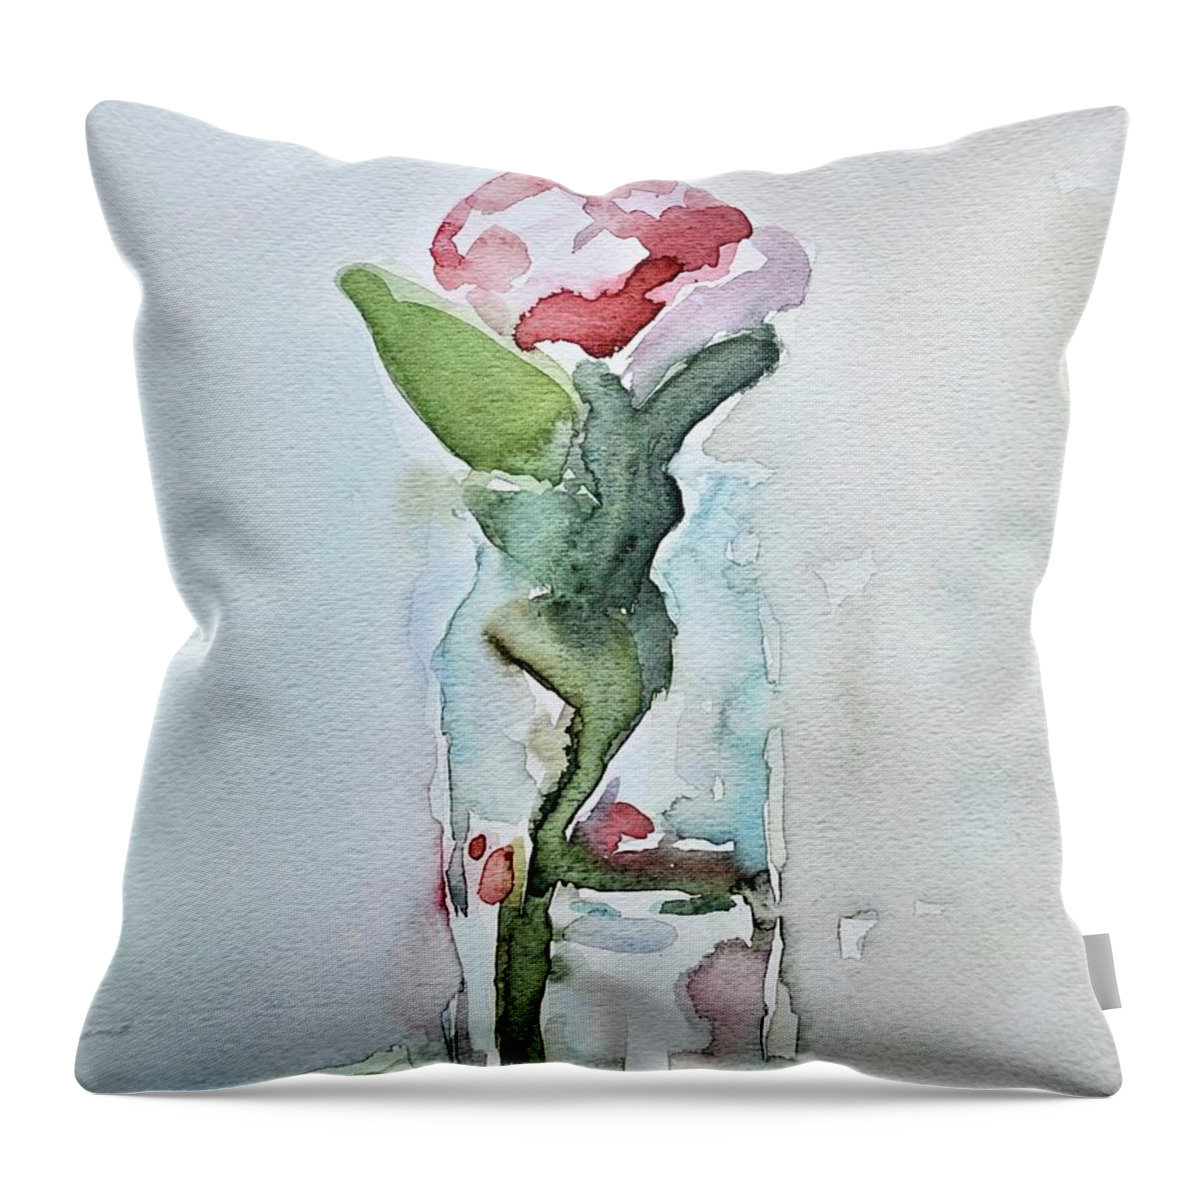  Throw Pillow featuring the painting Still Life by Mikyong Rodgers